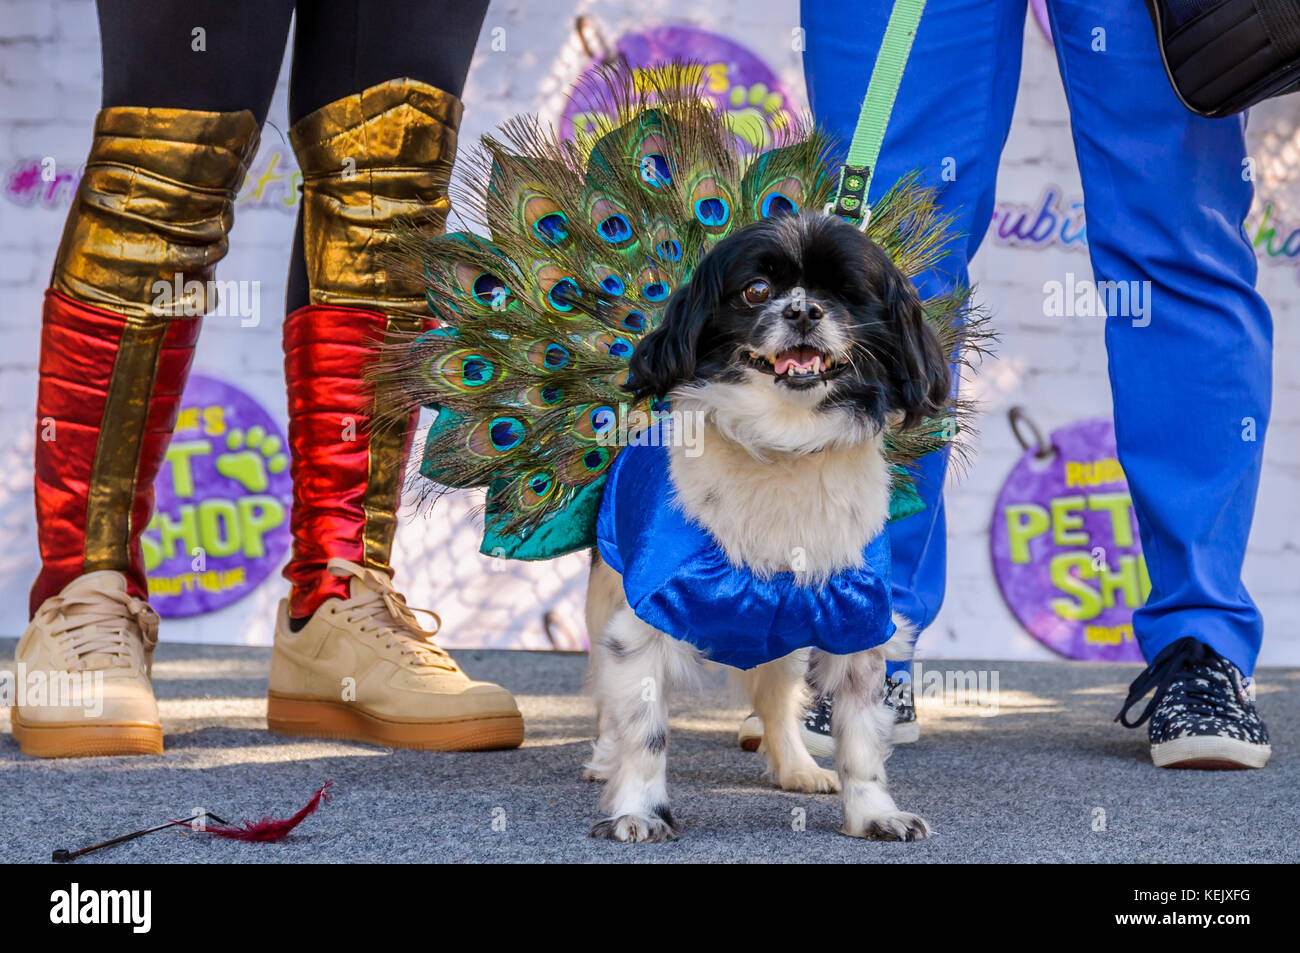 PHOTOS: Canine Promenade 2013 - 3rd Annual Dog Costume Contest and Parade  at the Esplanade